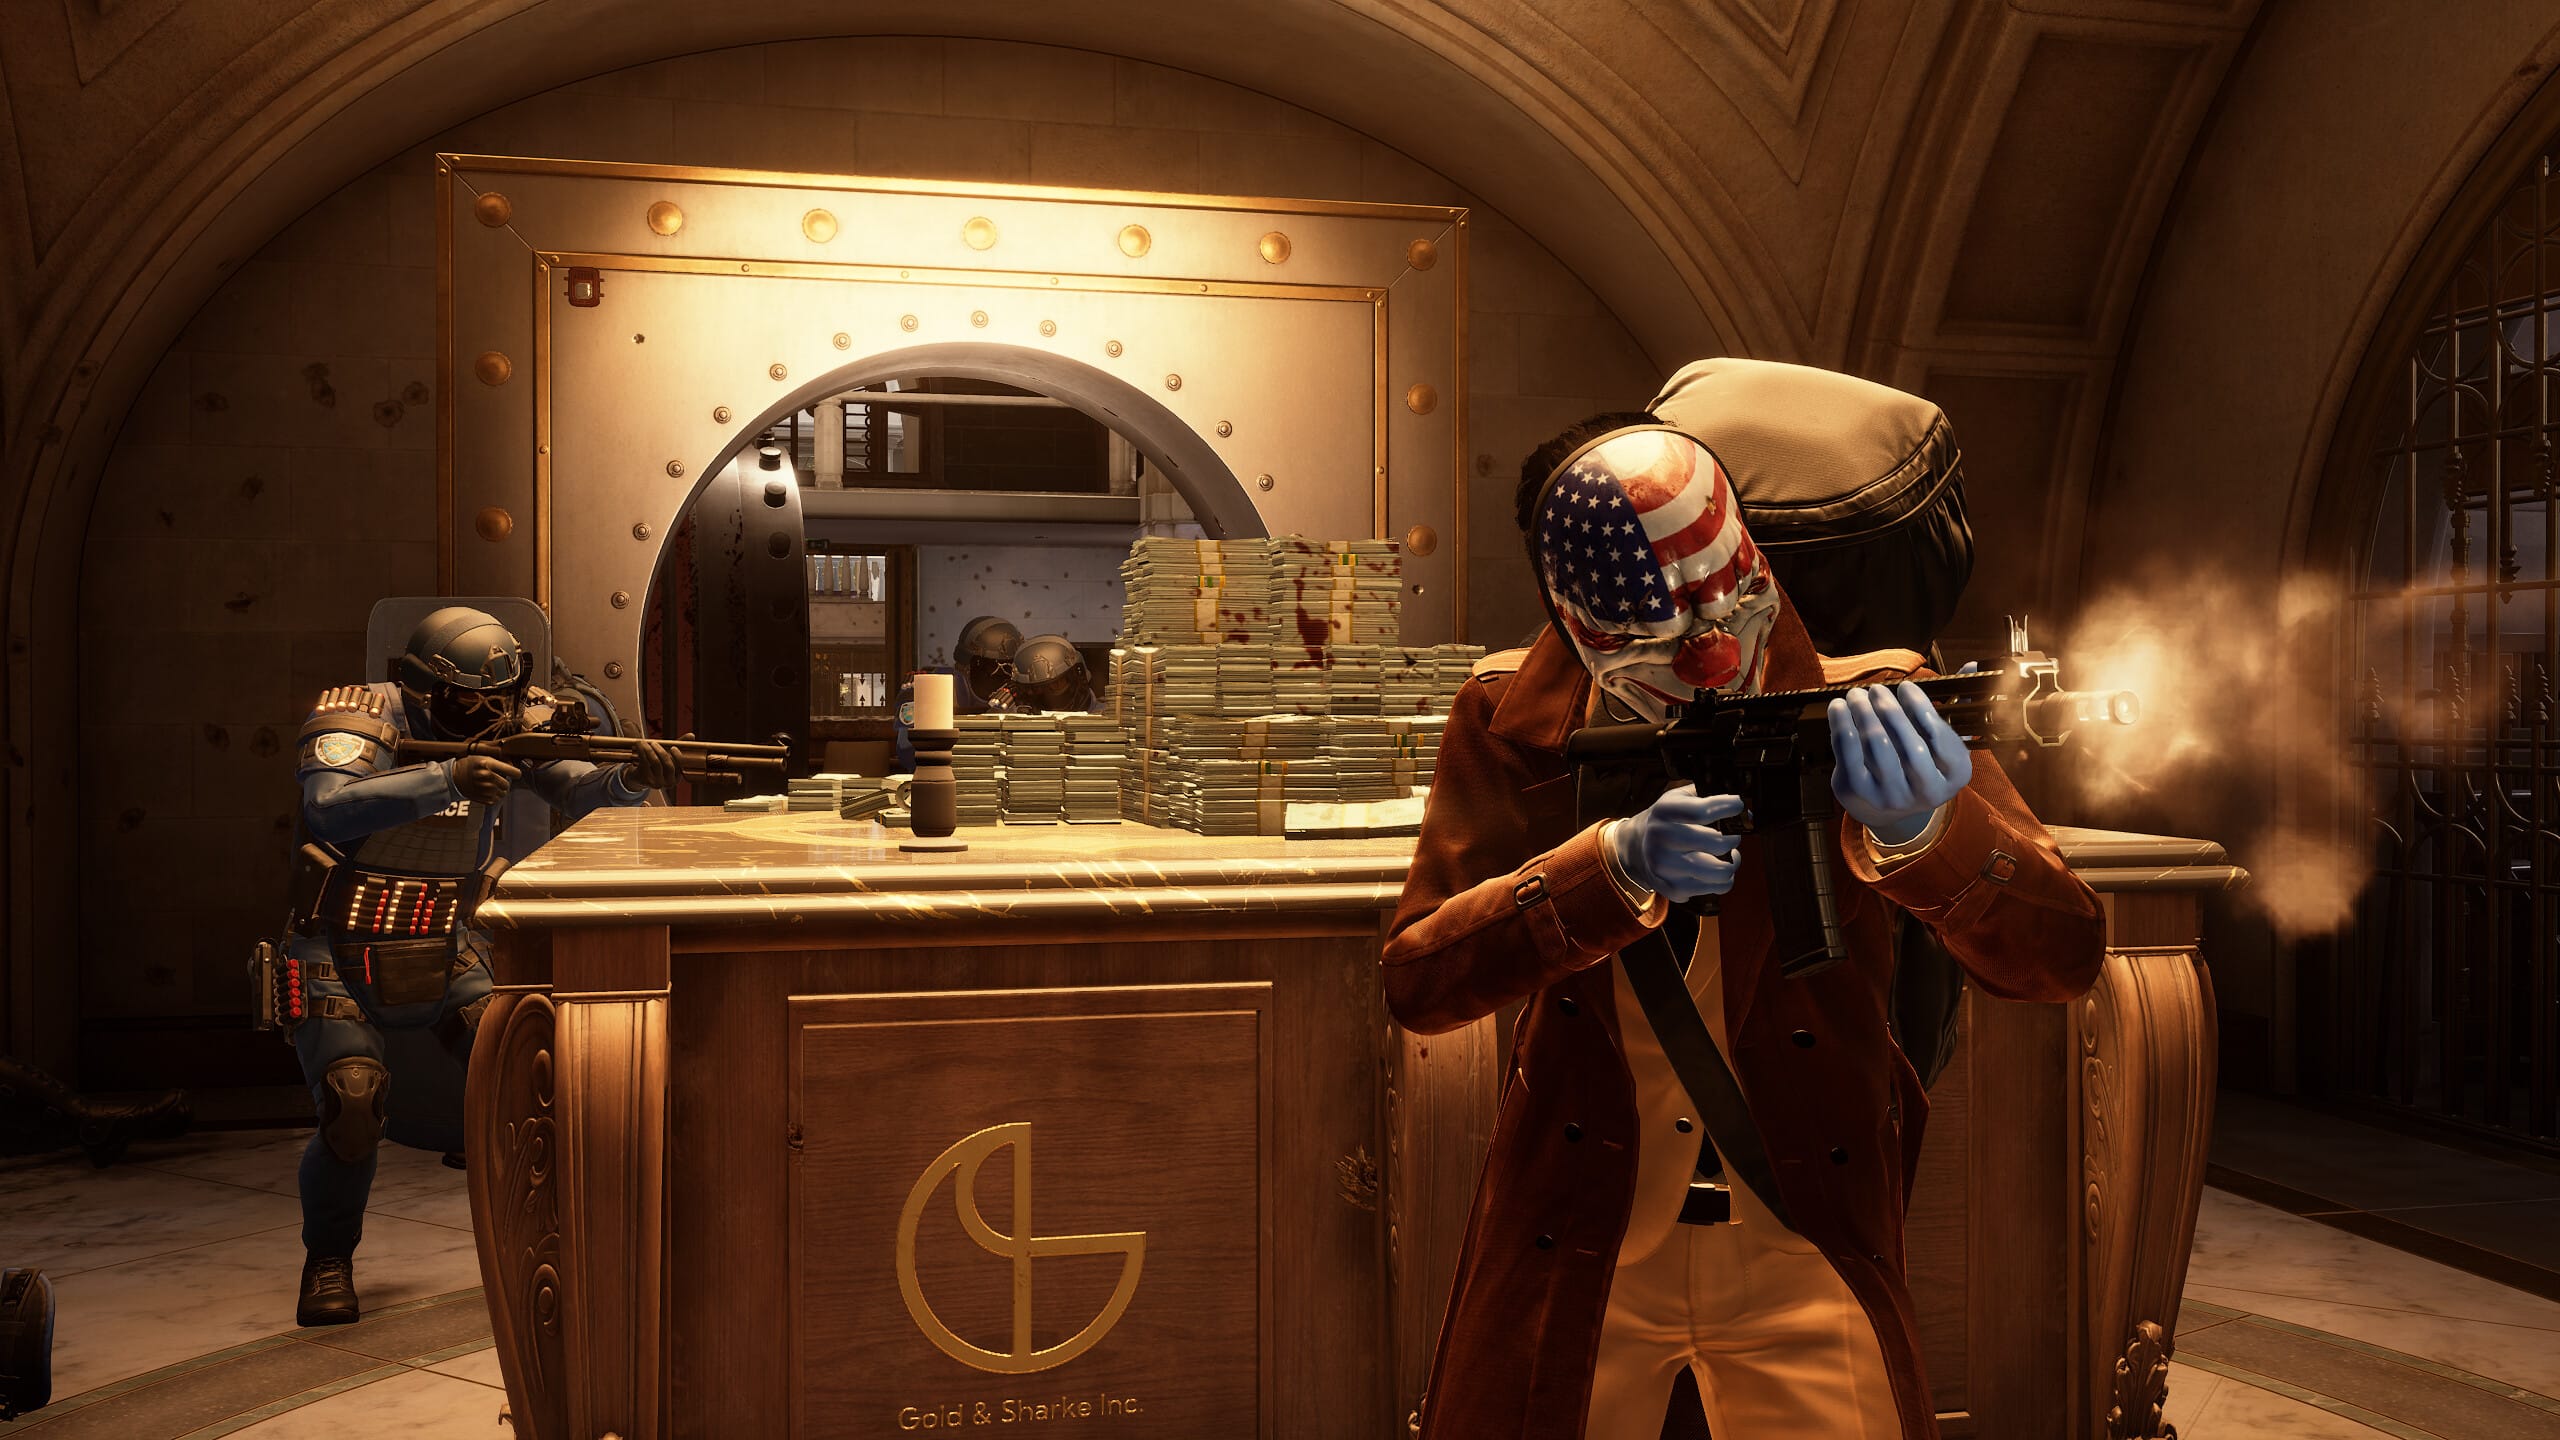 Is Payday 2 Crossplay?